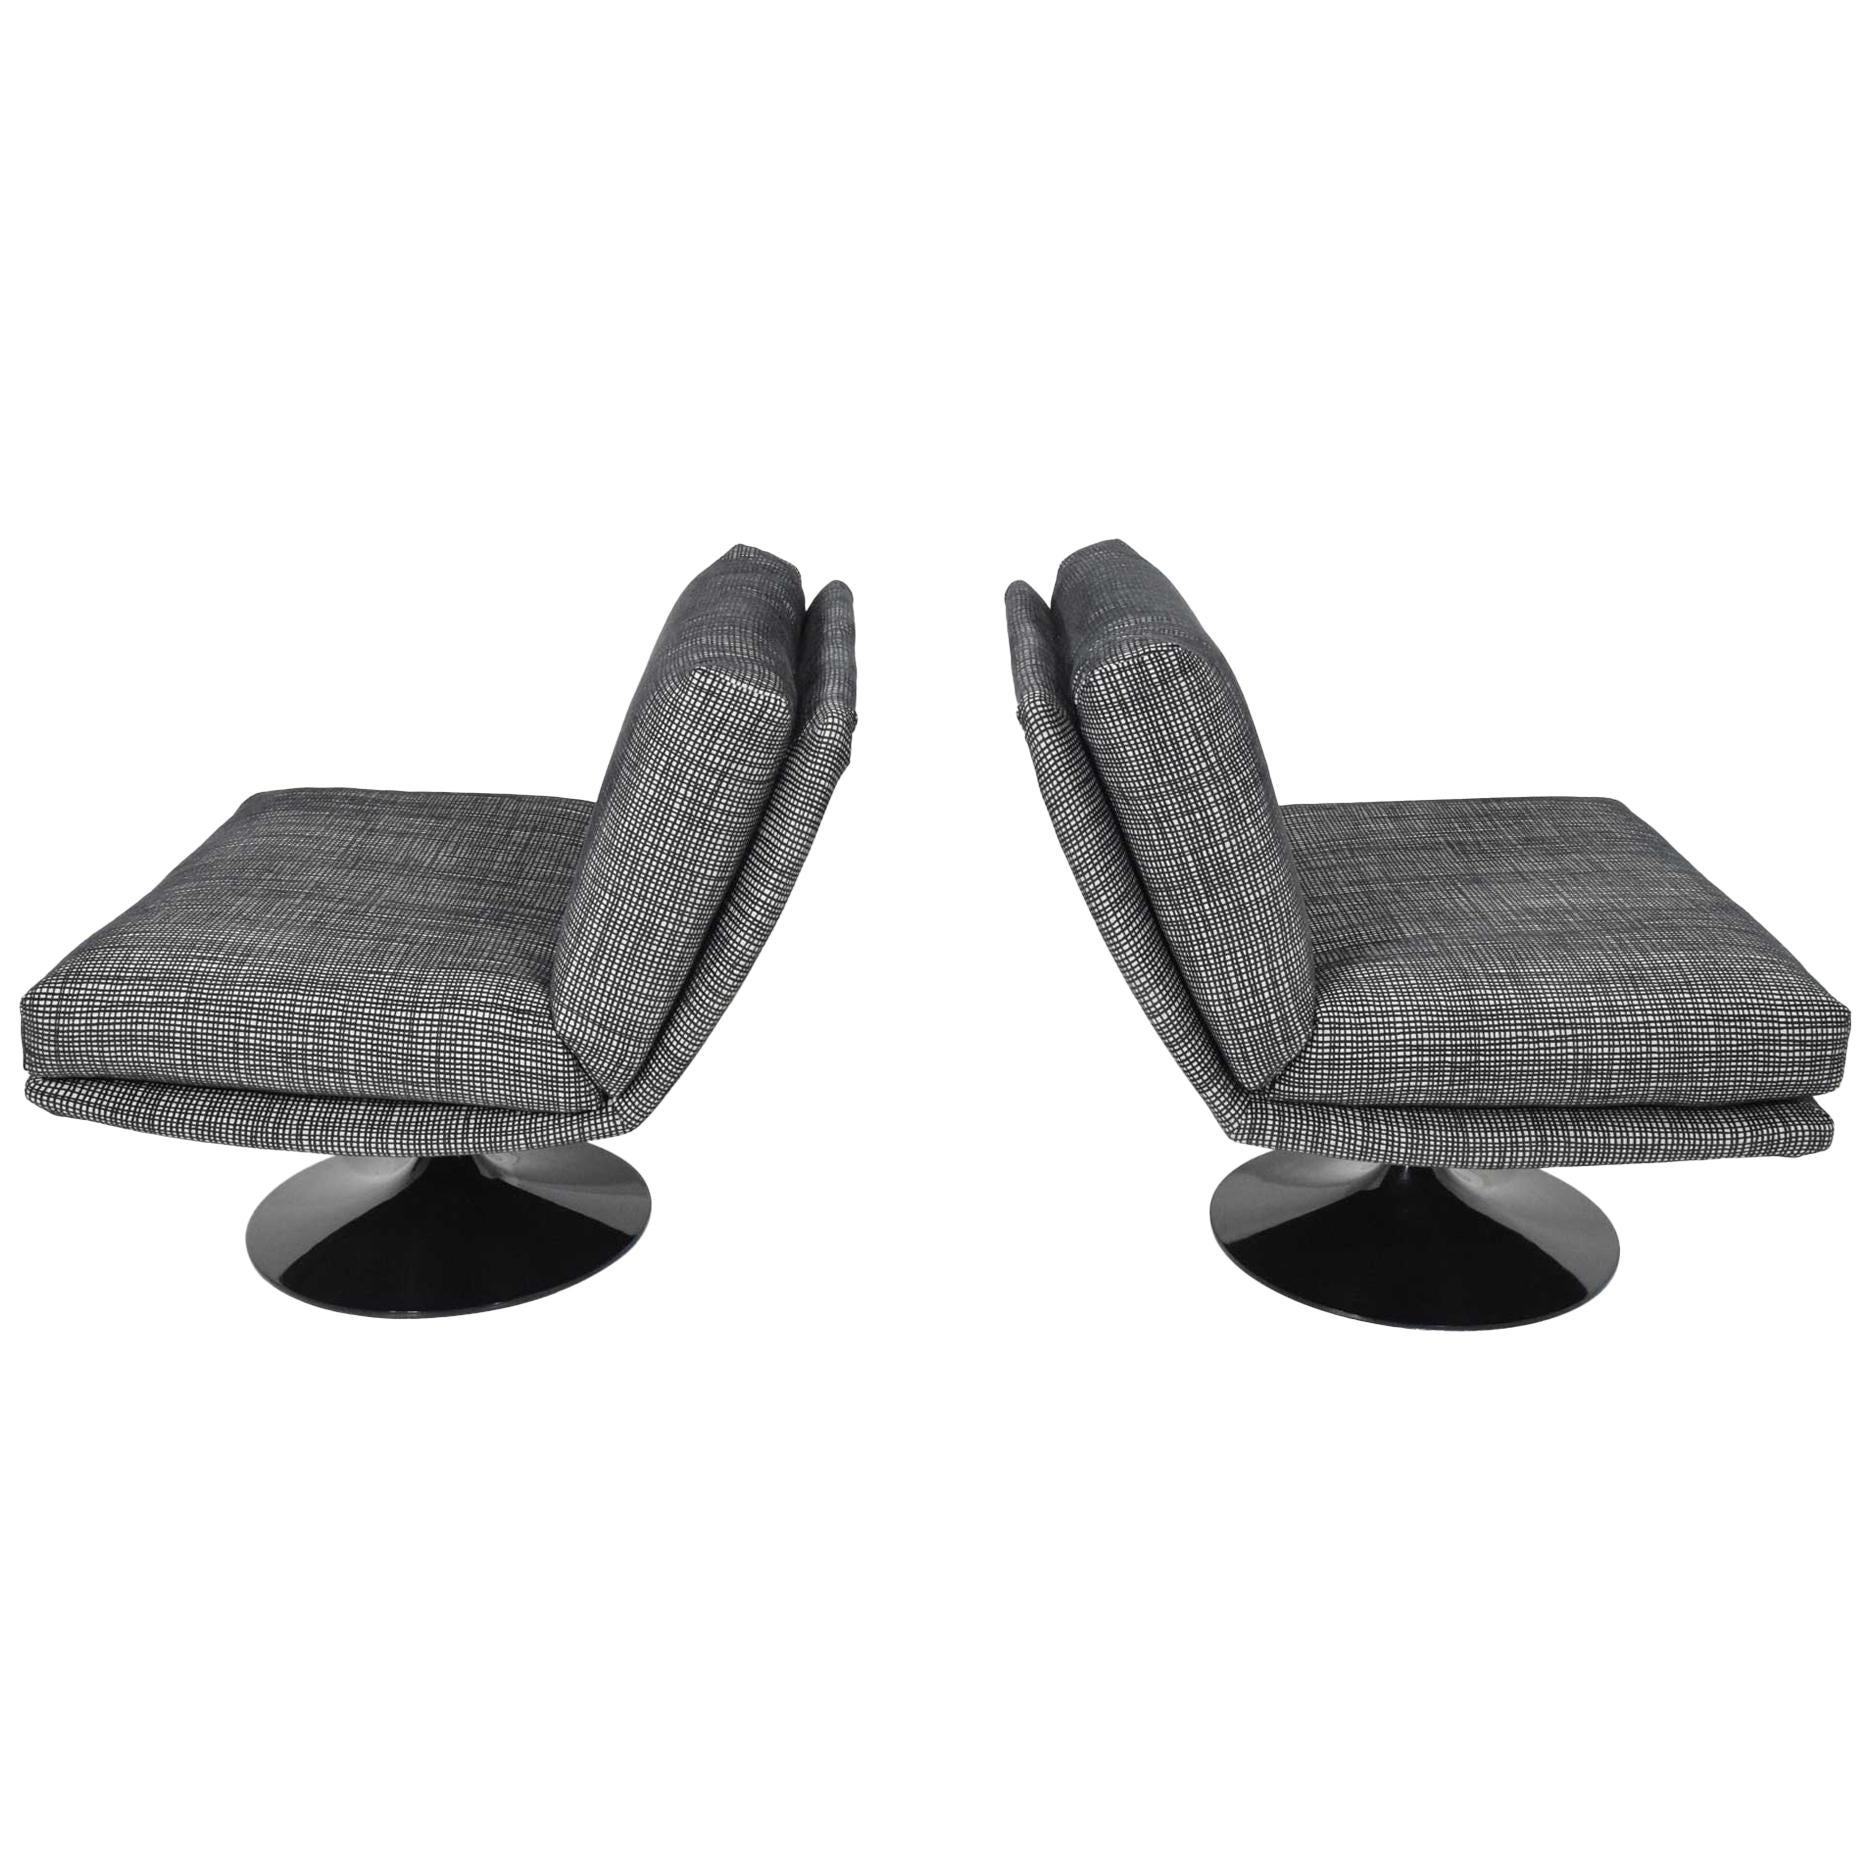 Adrian Pearsall for Craft Associates Swivel Chairs